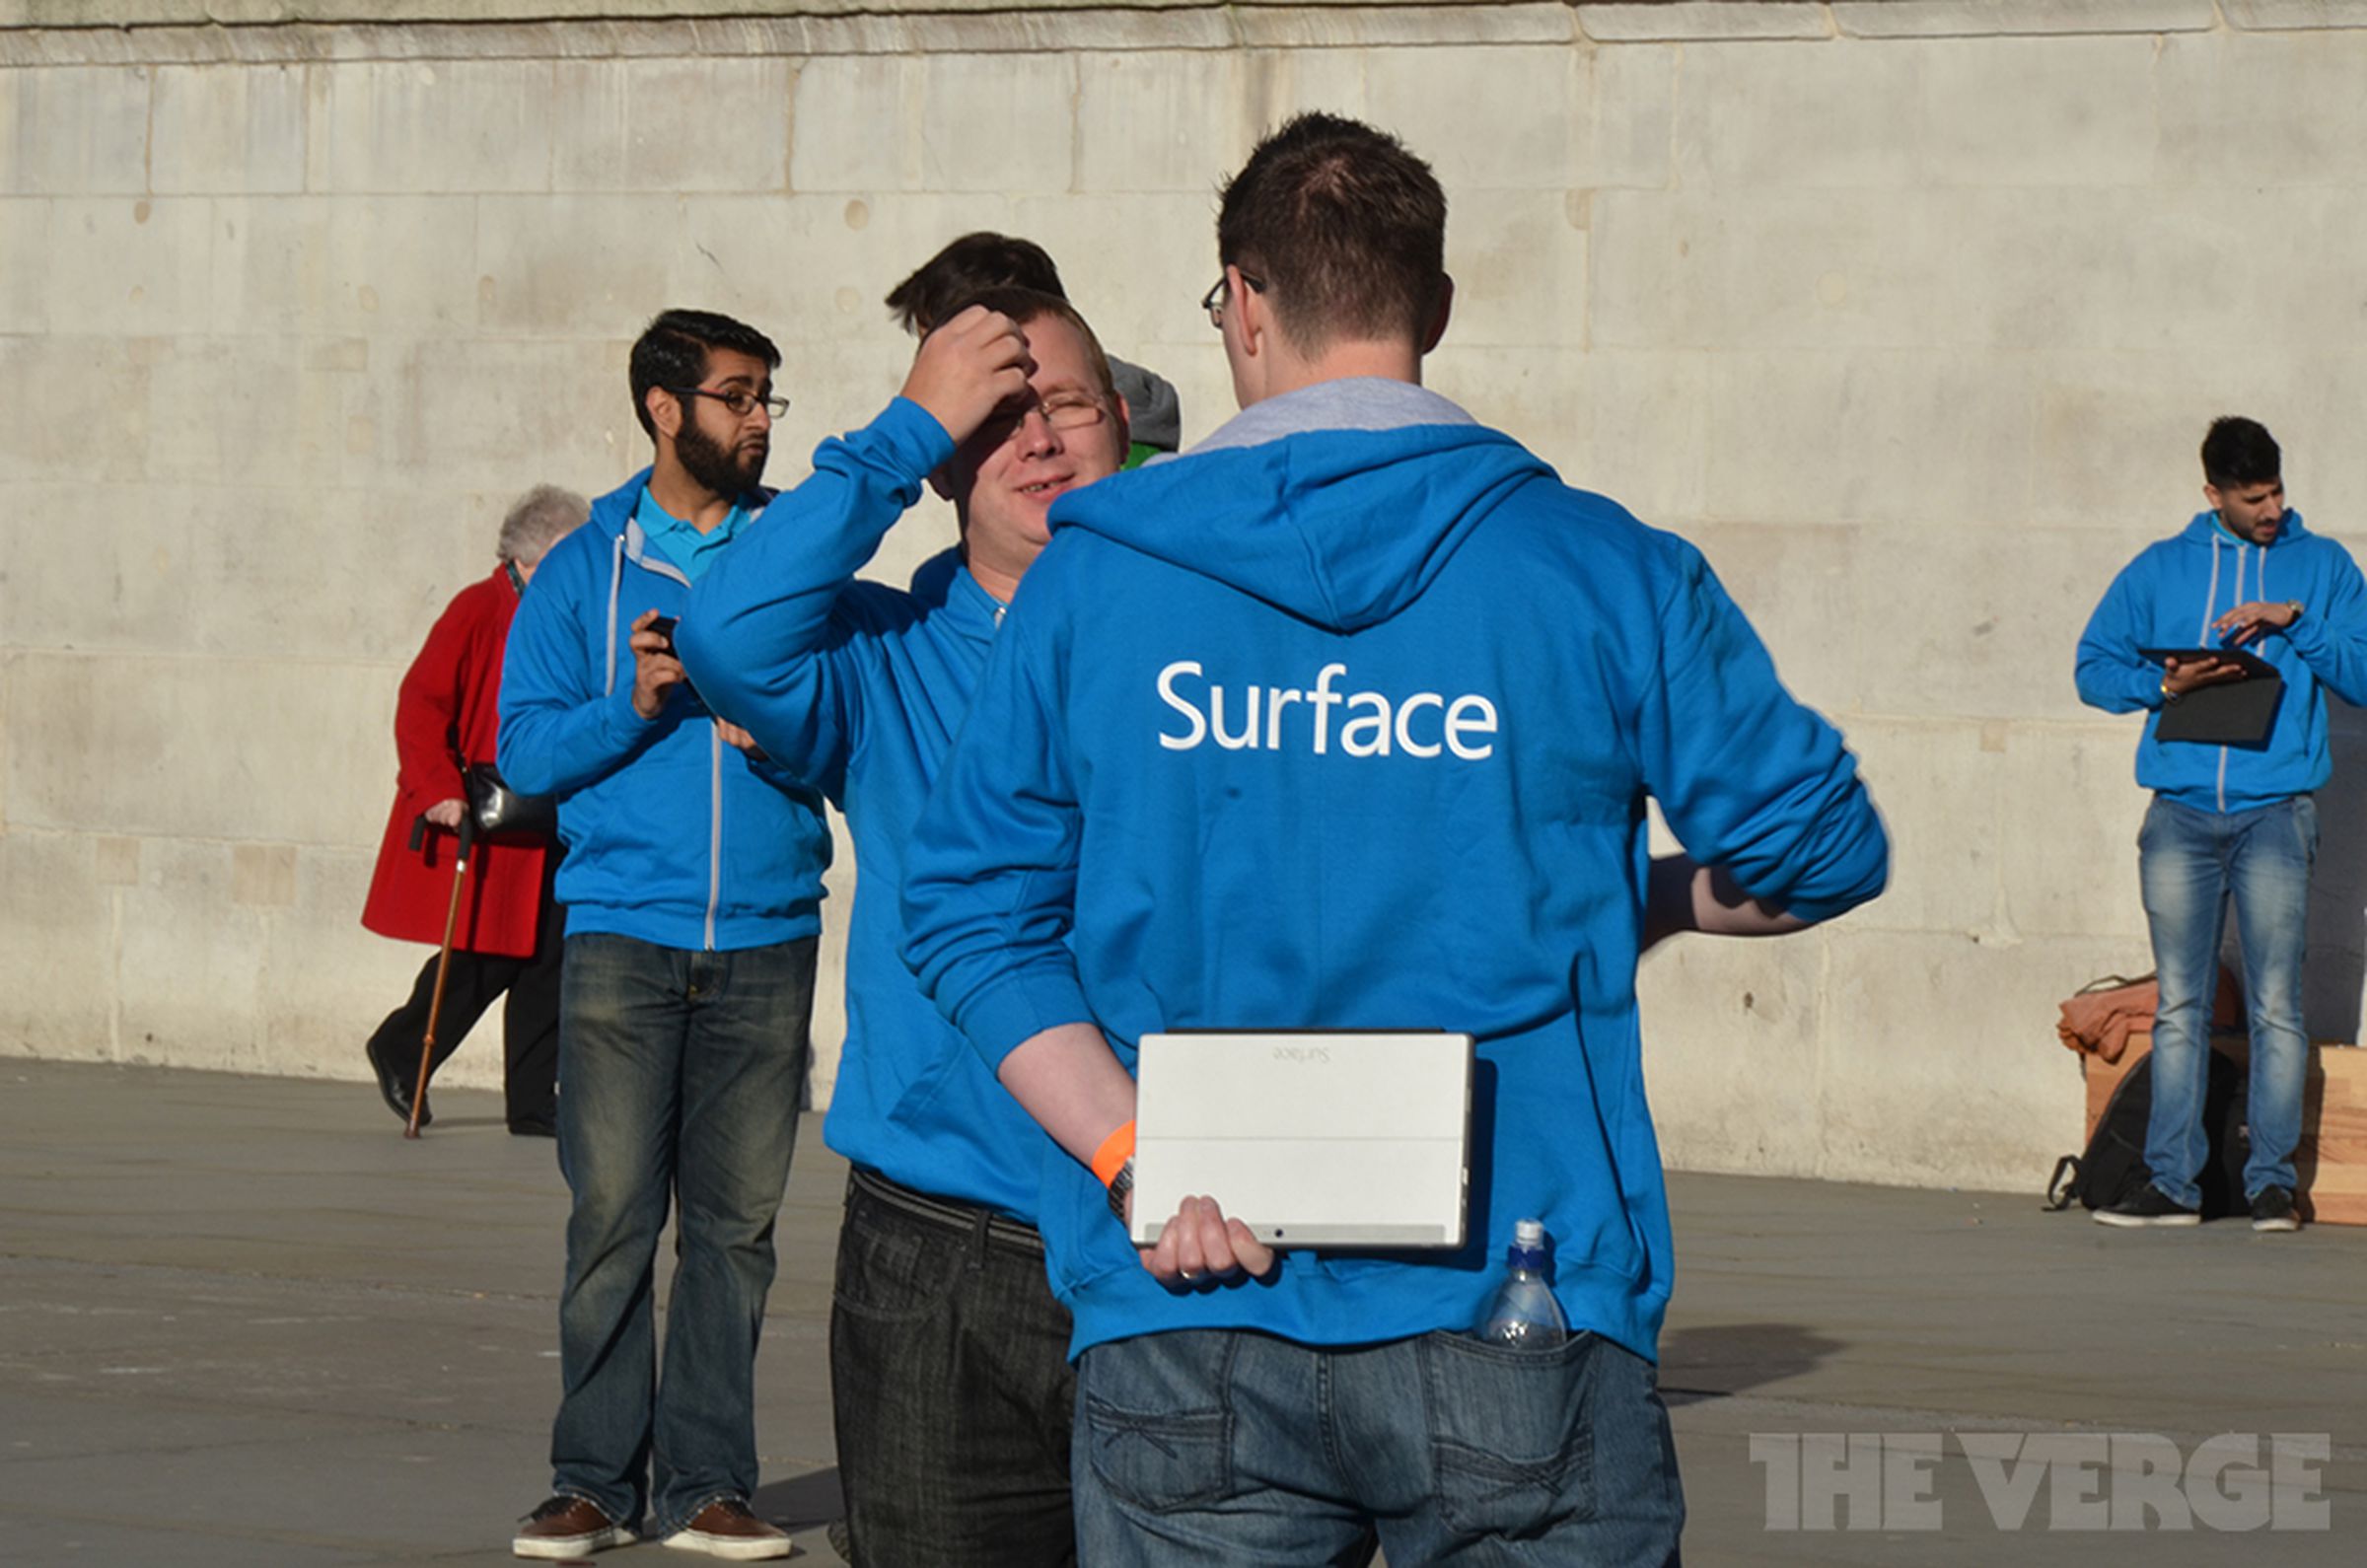 Giant Surface in London